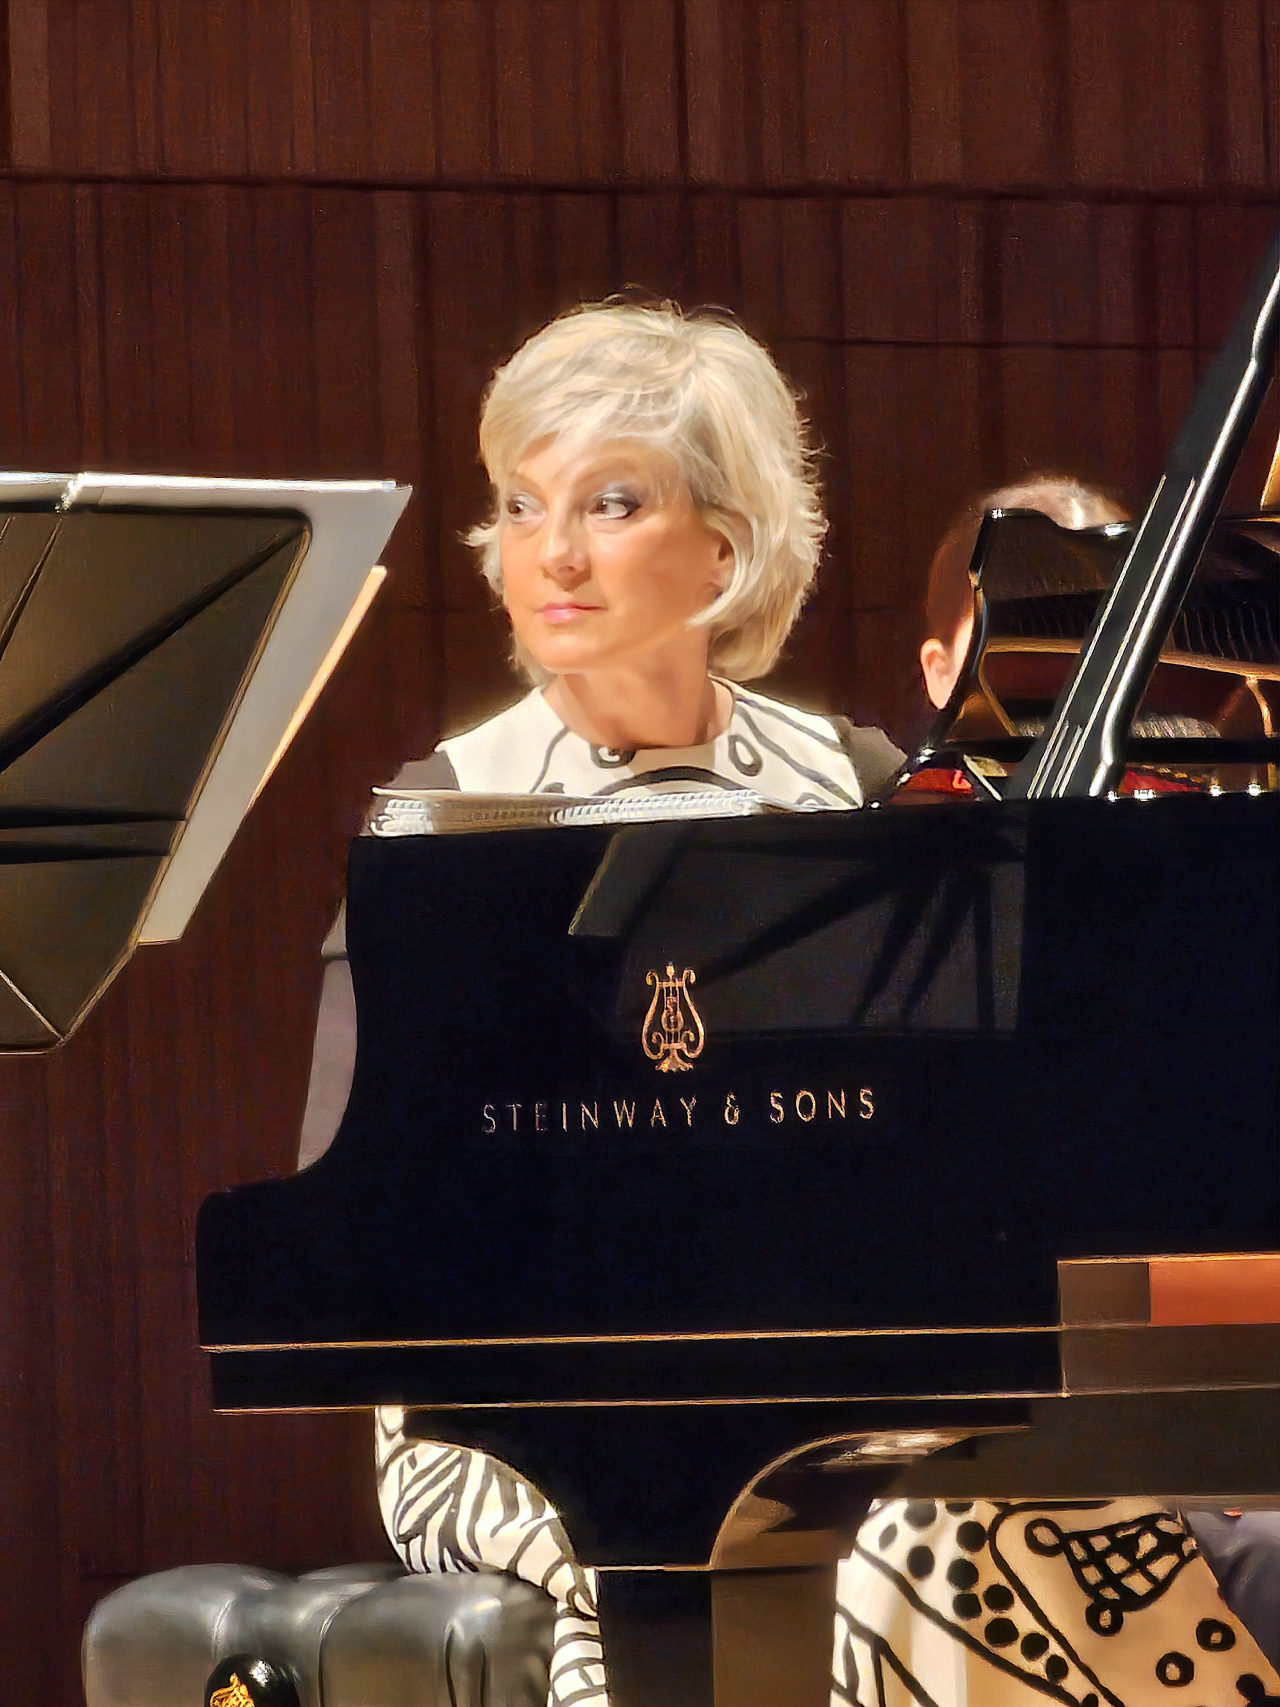 Pianist Helene Mercier is seen at a duo recital on May 8 at the Lotte Concert Hall. (Provided by a reader of The Korea Herald)